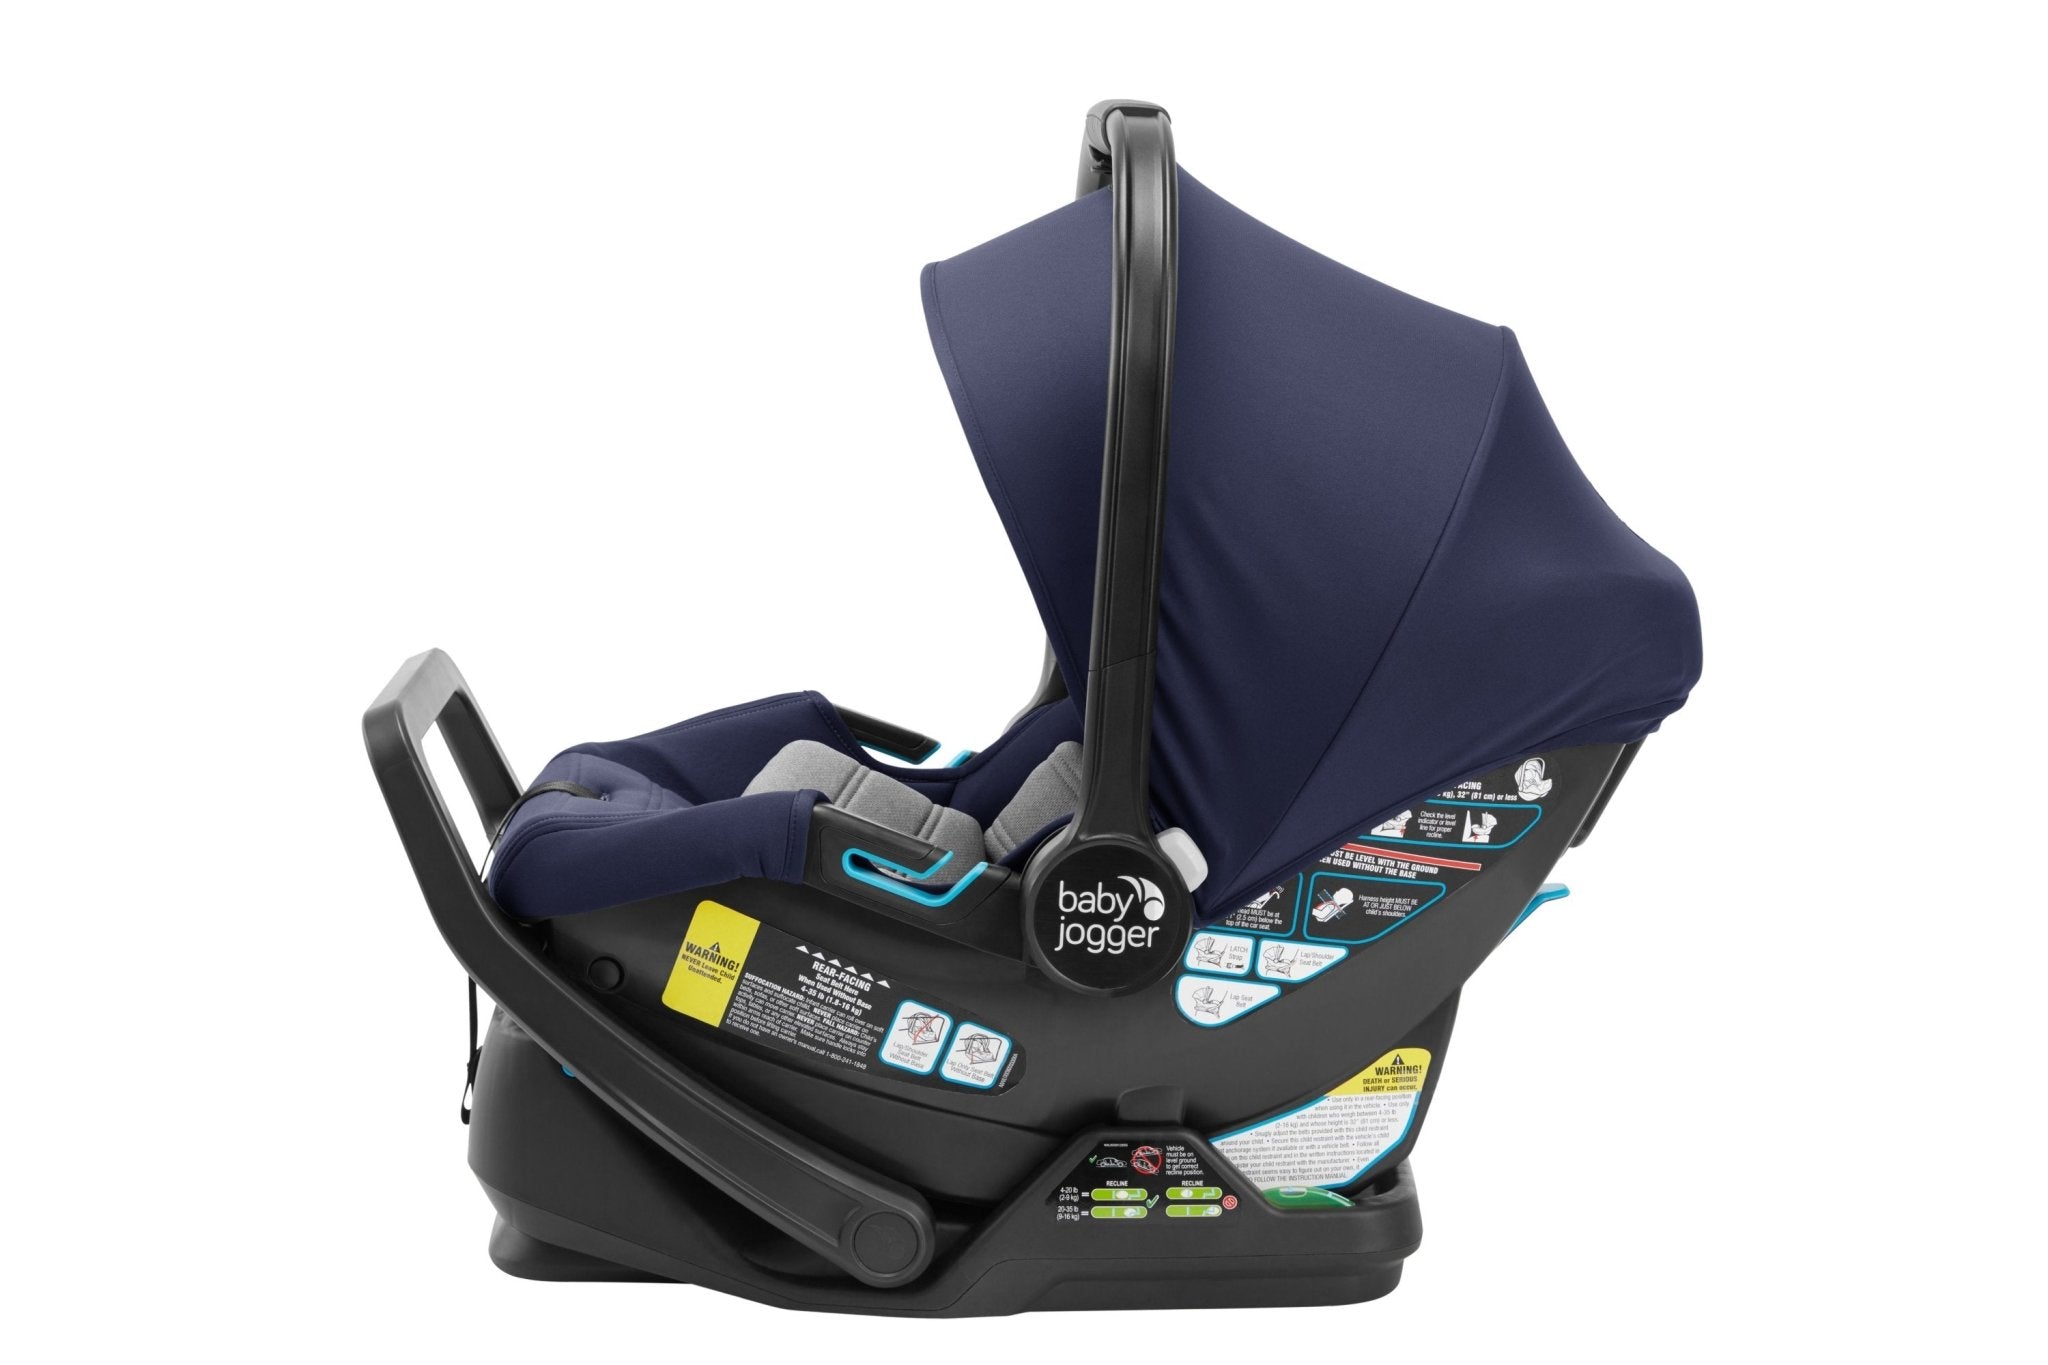 BABY JOGGER City GO Air Infant Car Seat - ANB Baby -$300 - $500